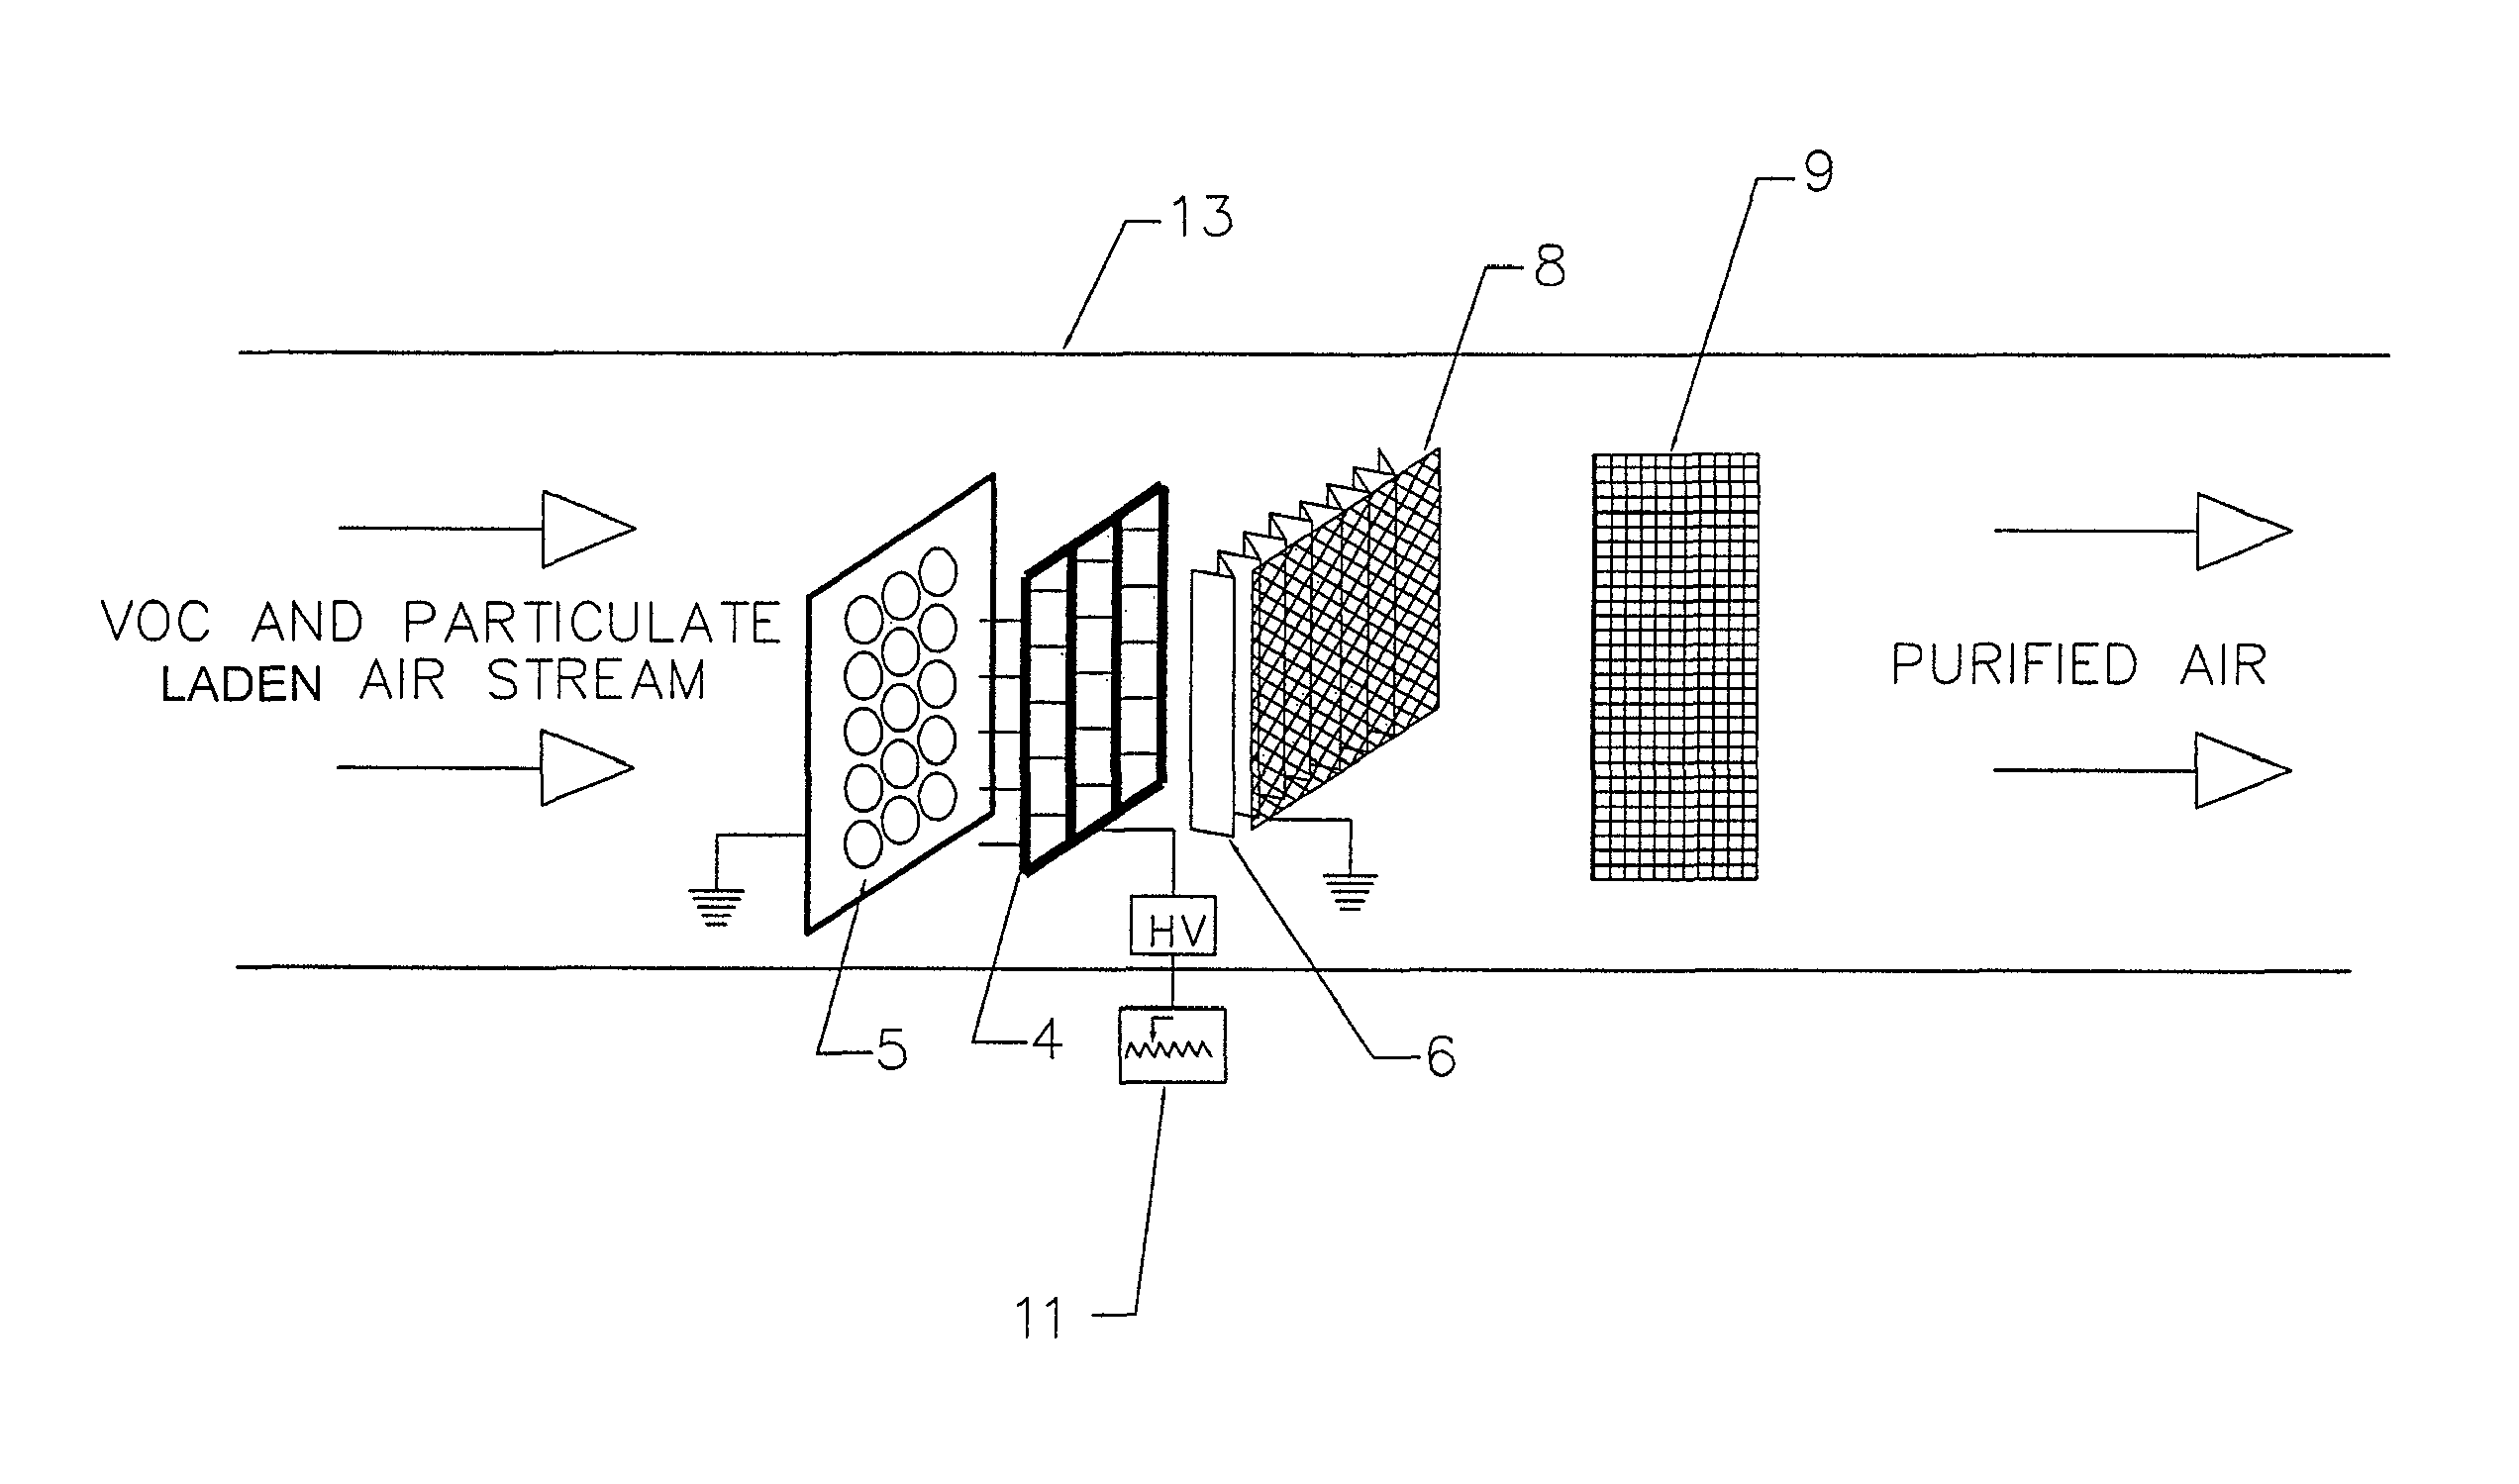 Apparatus for removal of particles and VOC from an airstream